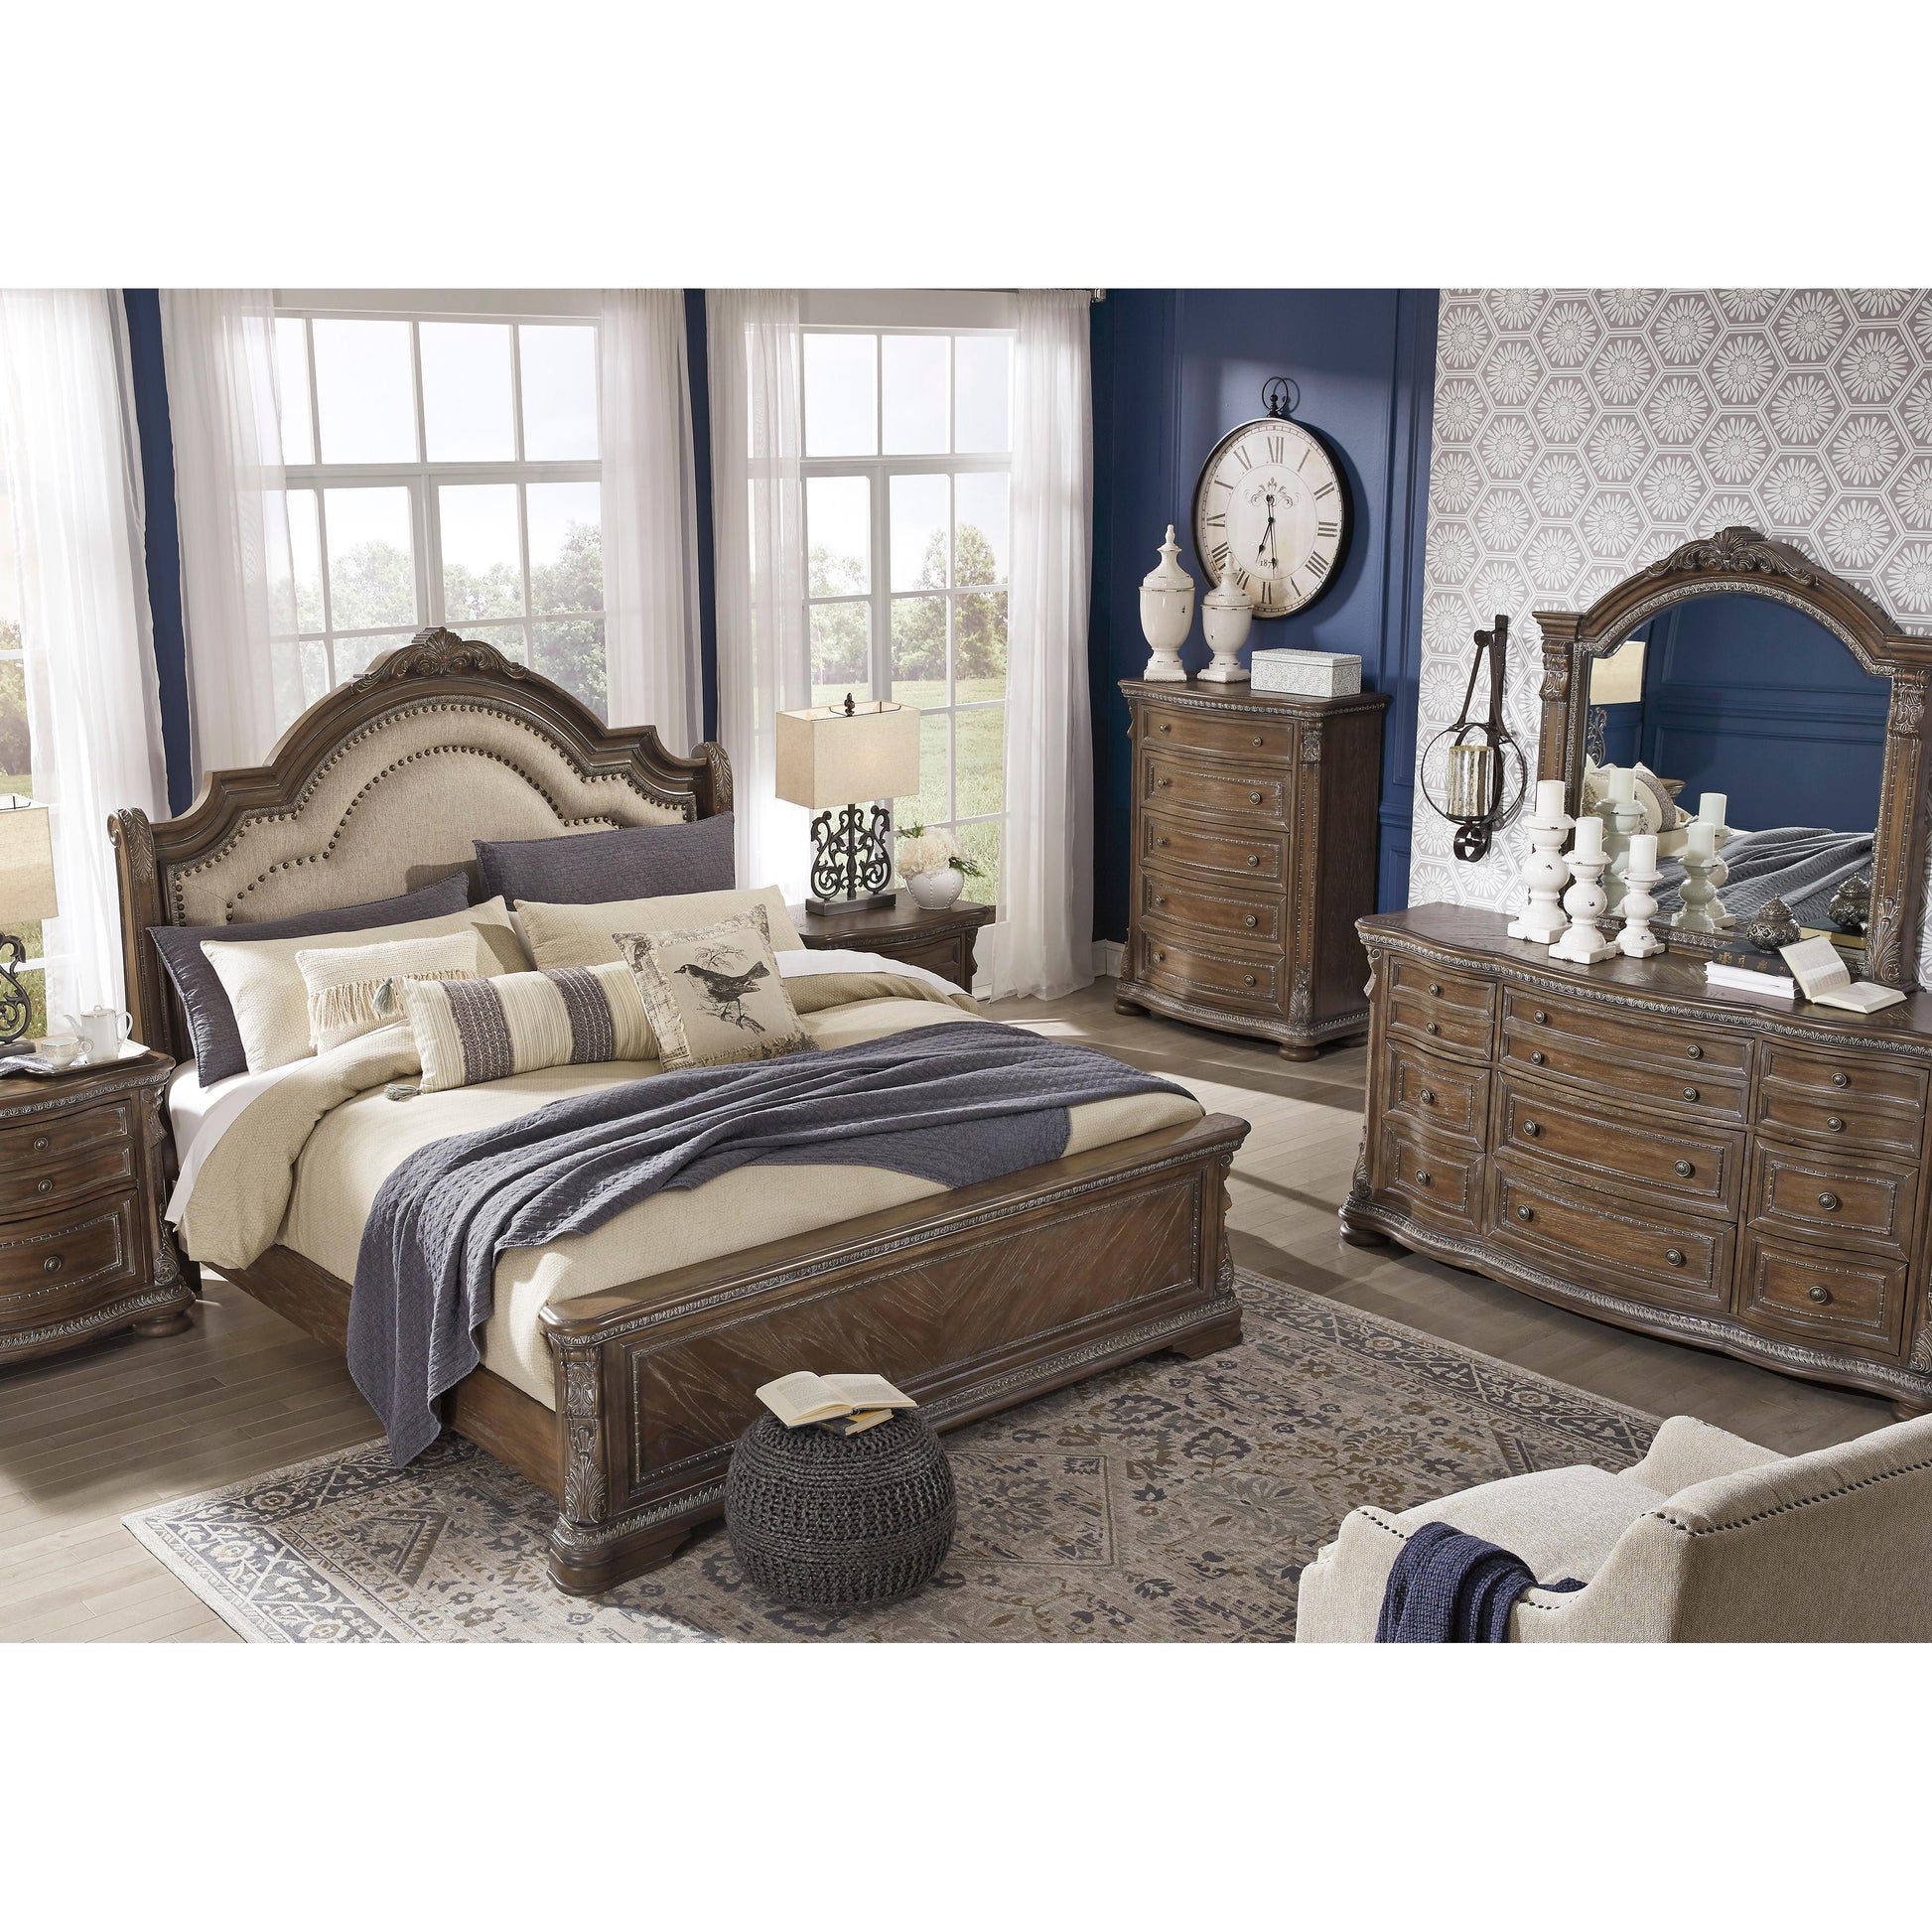 Signature Design by Ashley Charmond Queen Upholstered Sleigh Bed B803-57/B803-54/B803-96